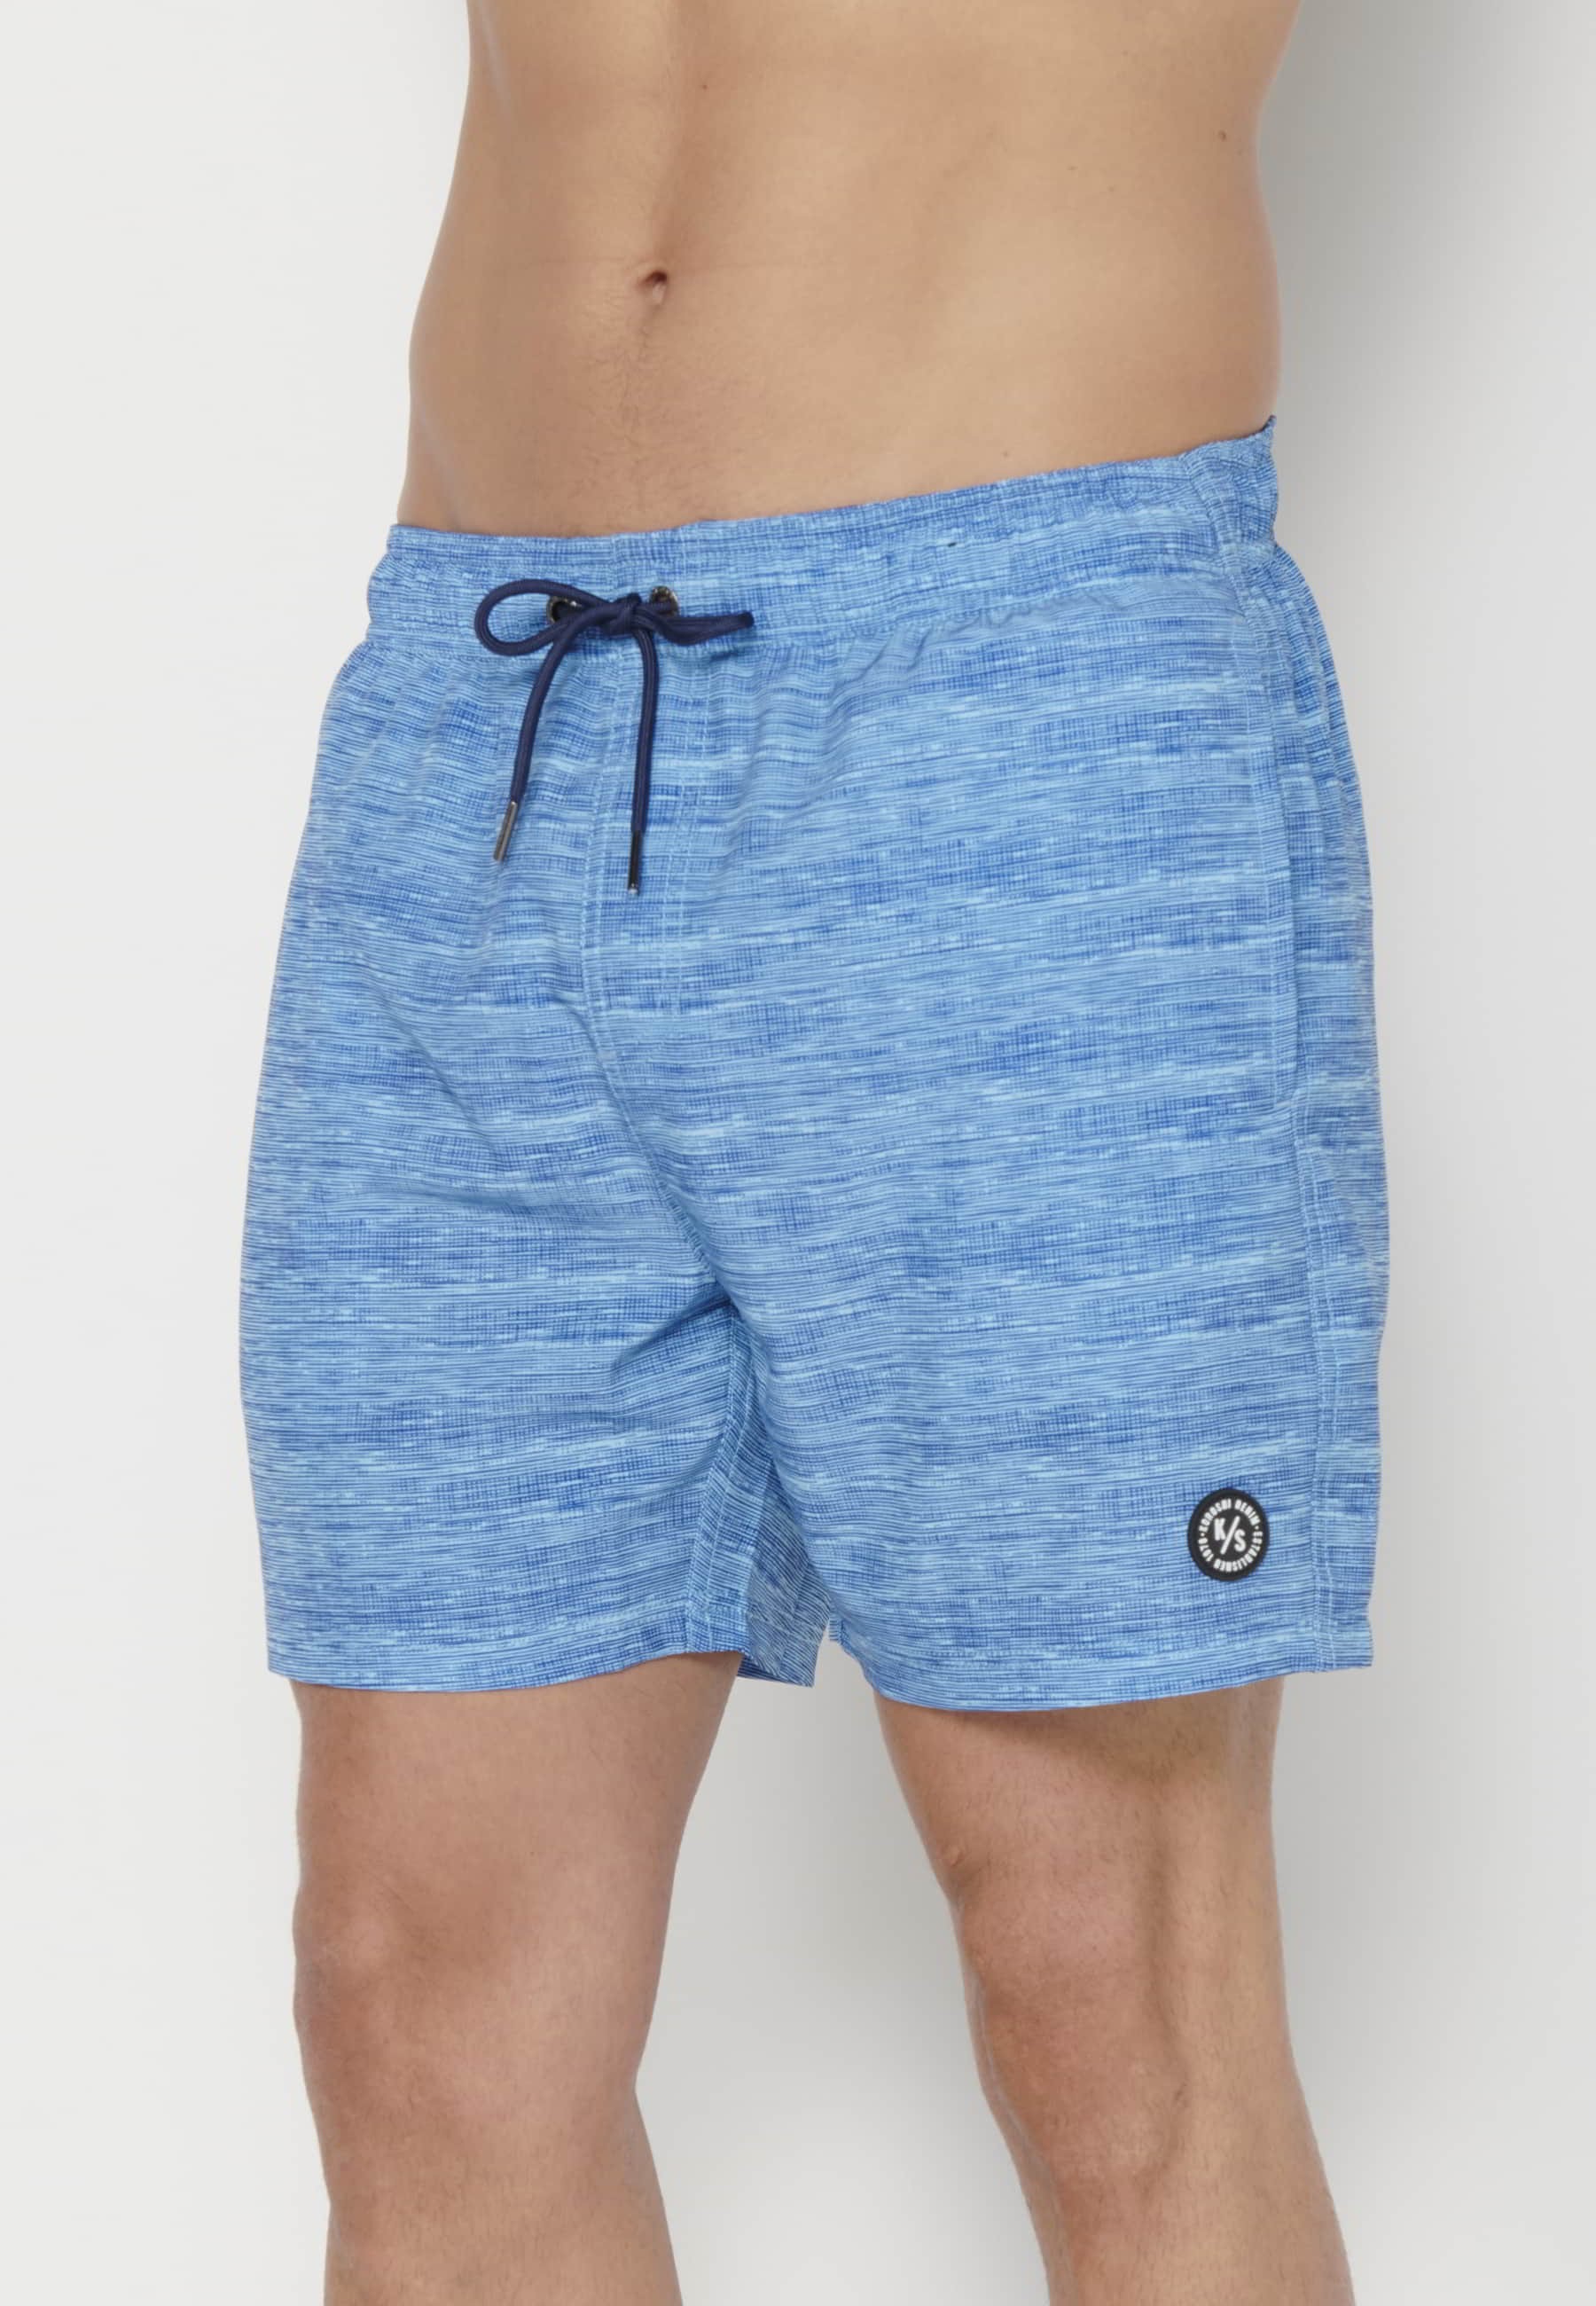 Short swimsuit with three Pockets in Aqua Blue color for Men